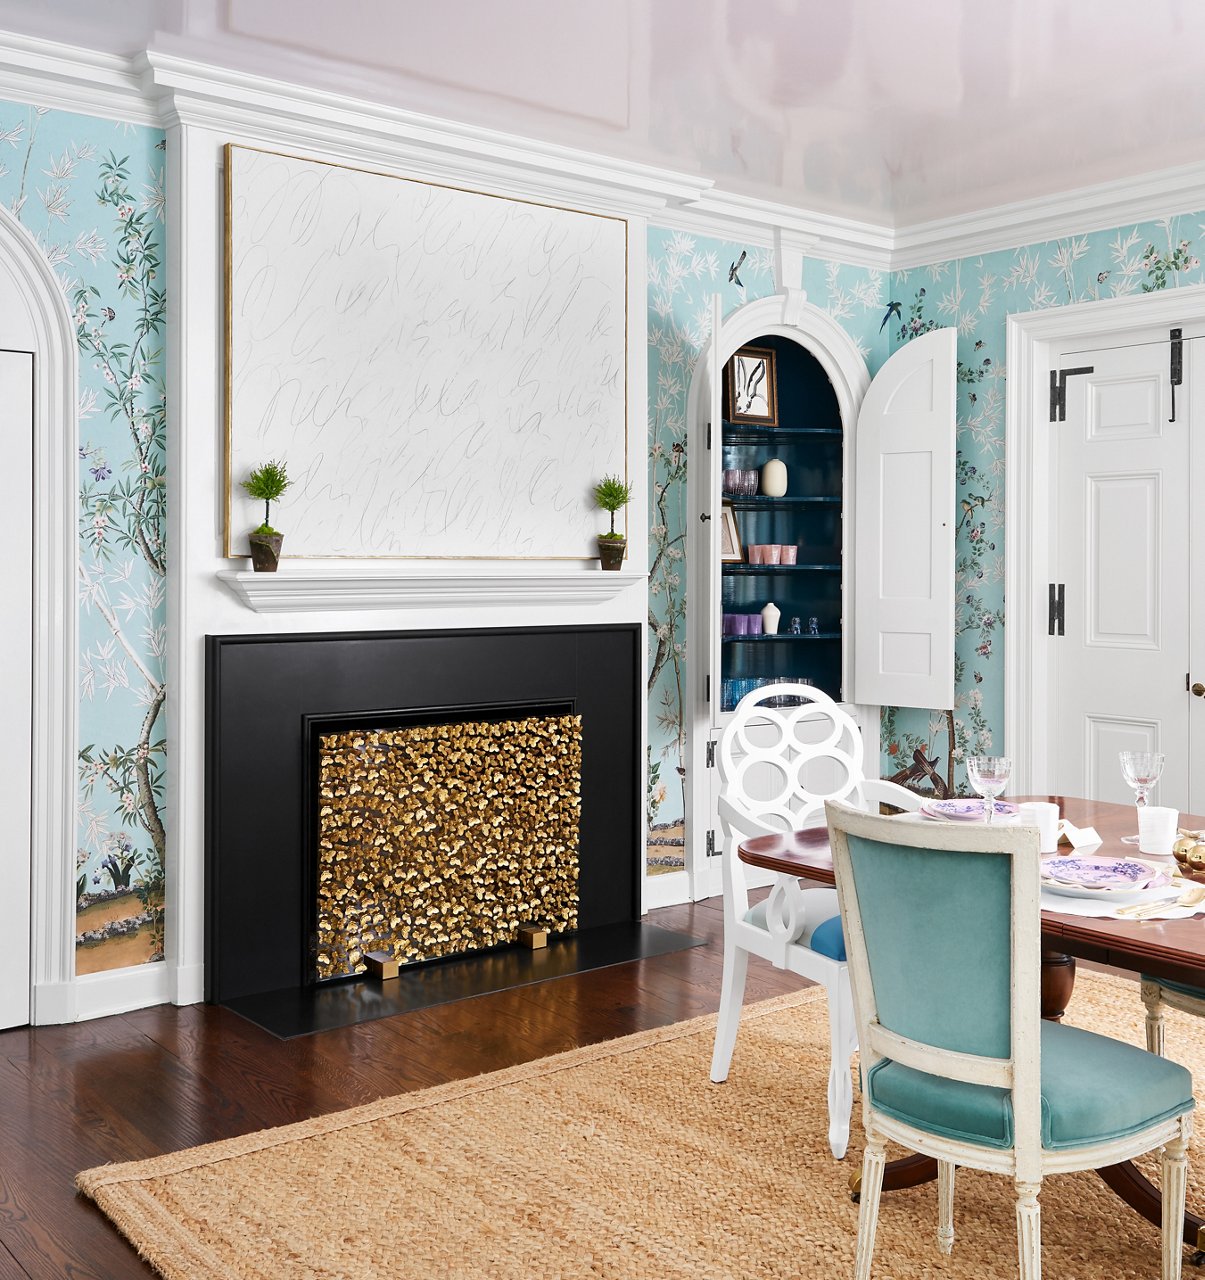 Cambria Blackpool Matte dining room fireplace surround featured in the Lake Forest Showhouse